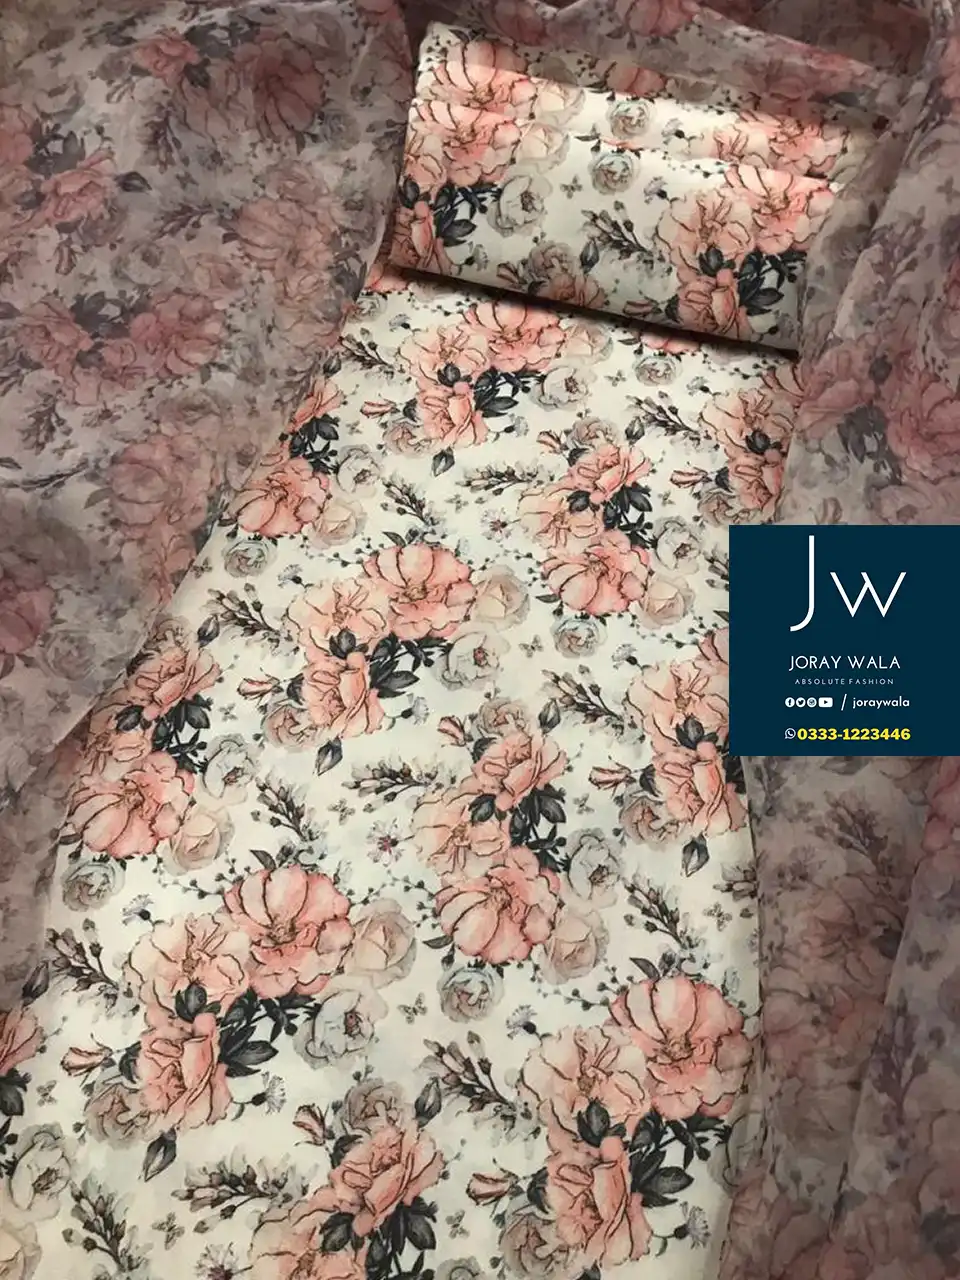 Digital Printed Swiss Lawn D19 with organza dupatta. free delivery available at joraywala